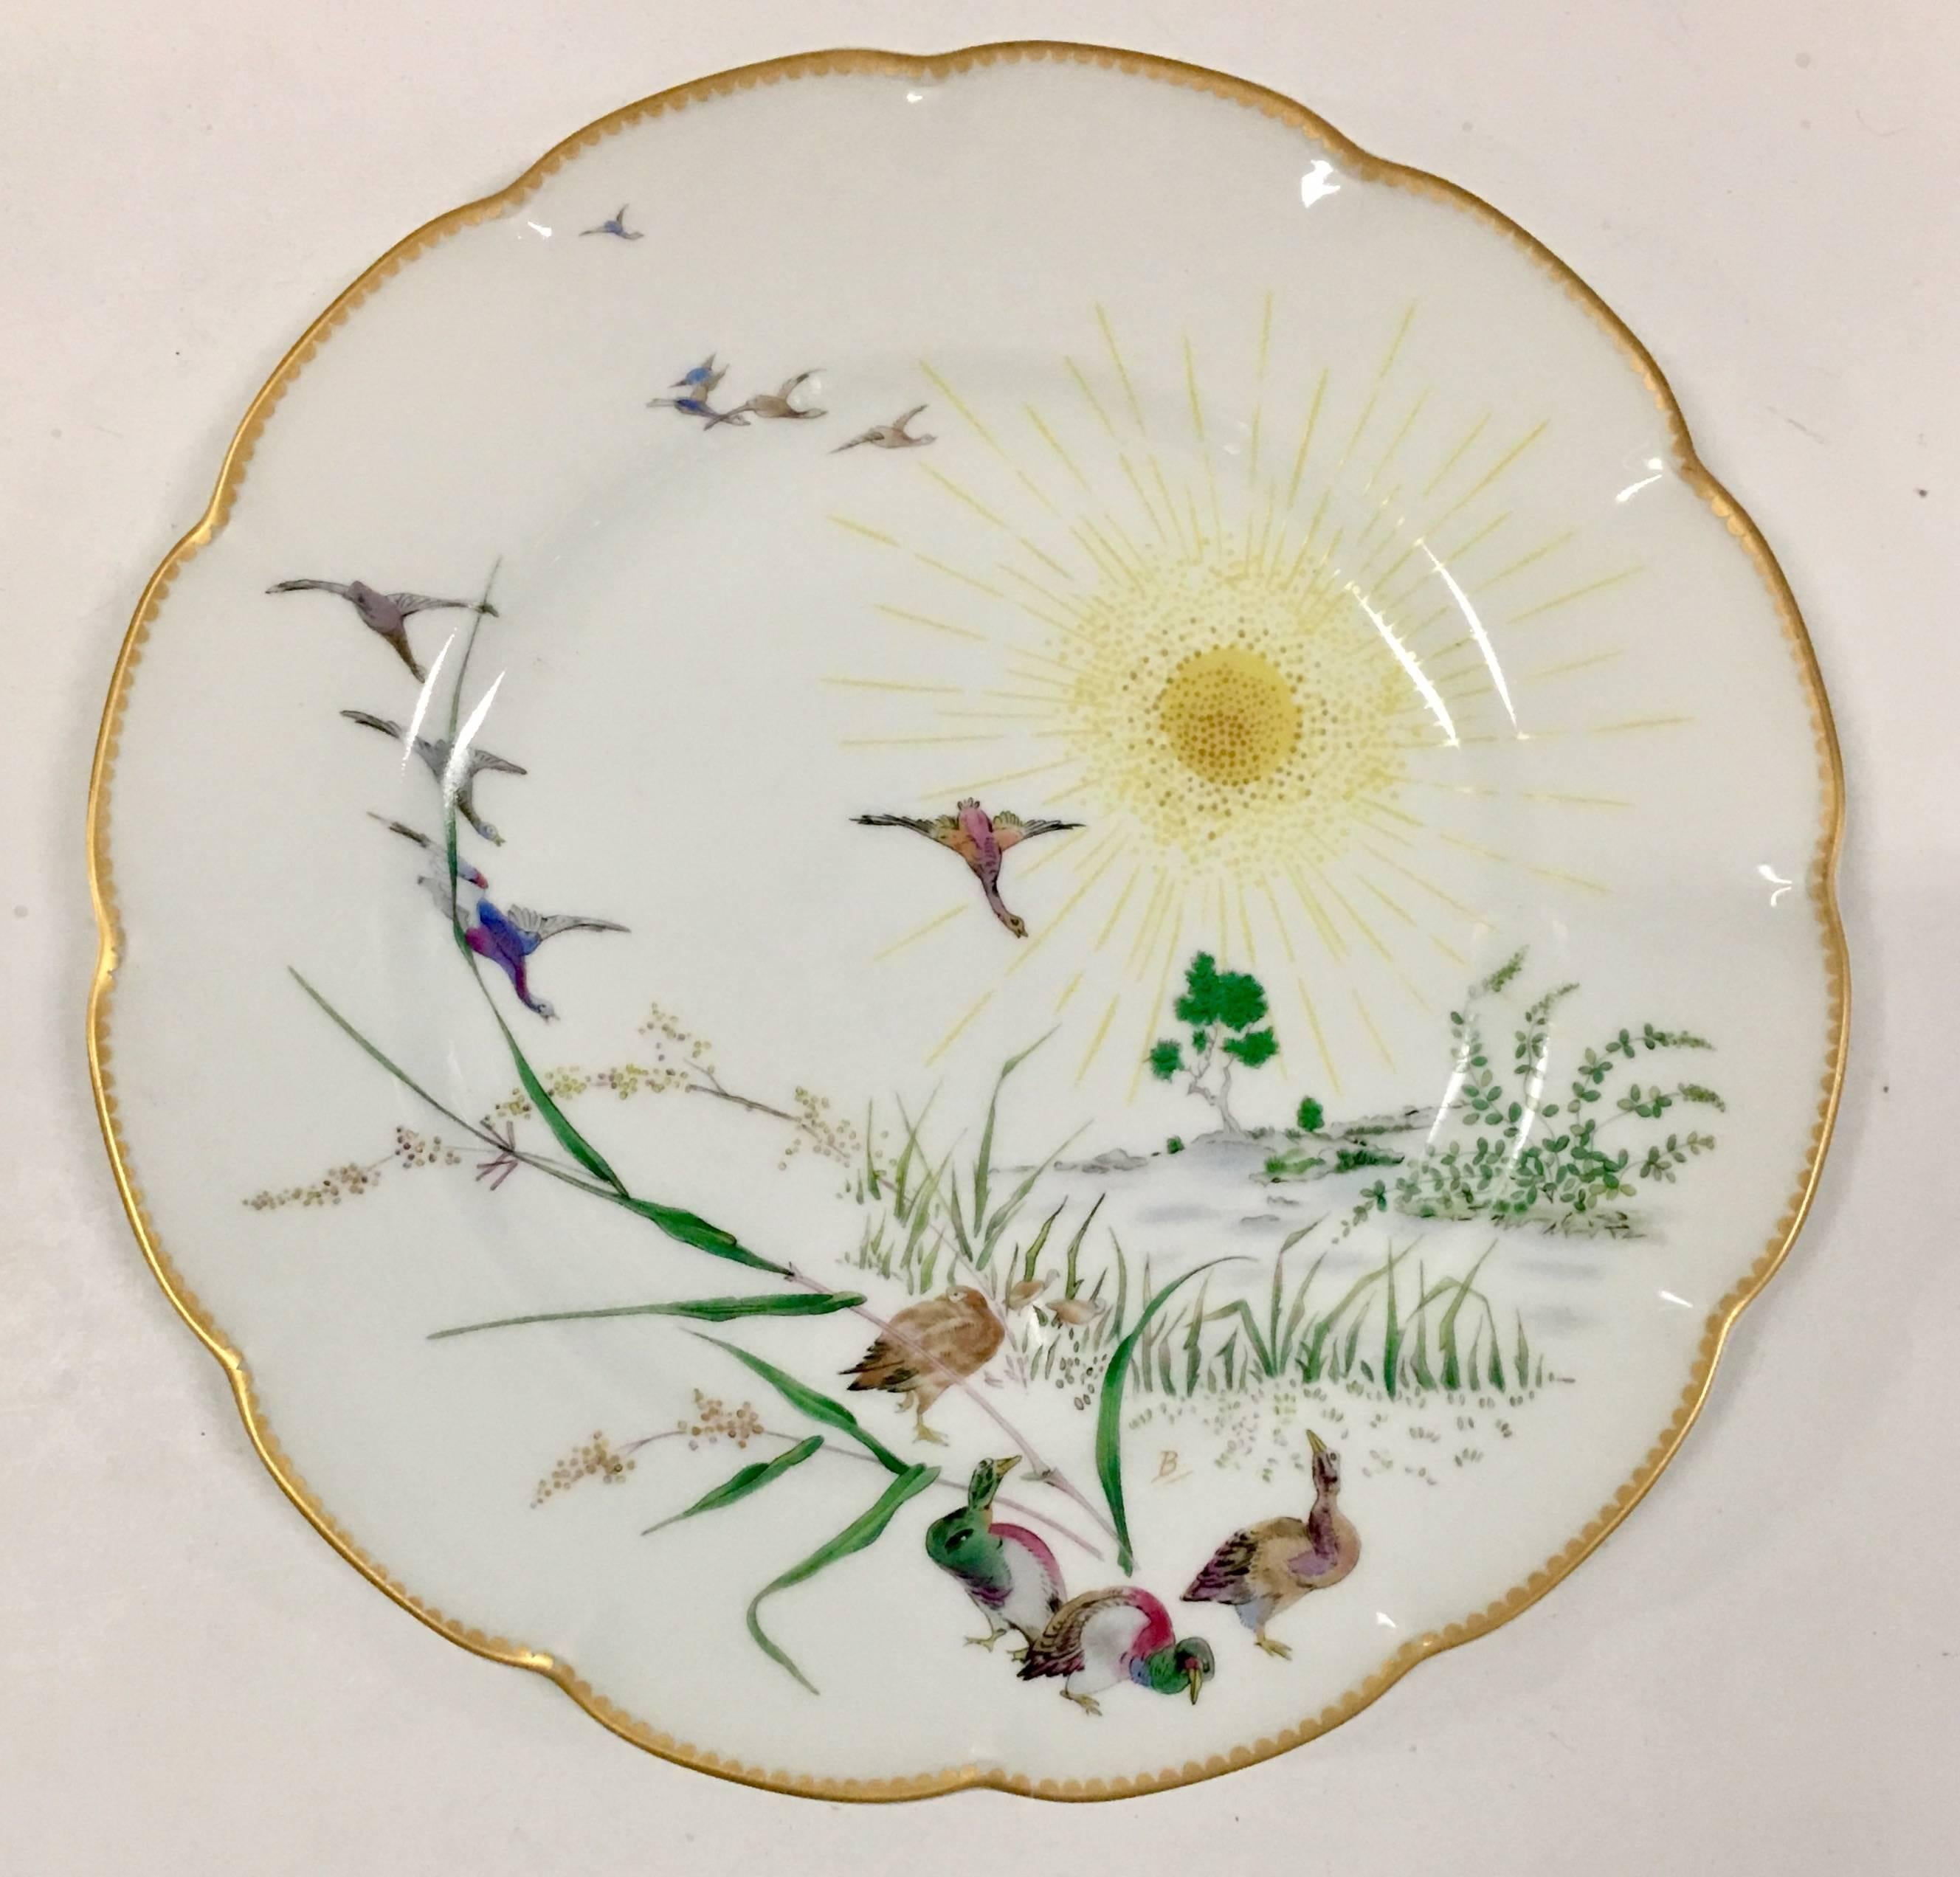 Felix Bracquemond designed Haviland Limoges France, compete set of four, Four Seasons, hand-painted collector's plates. Introduced in 1975 by the Haviland Limoge France and limited to 5,000 sets. Each plate, depicting spring, summer, fall and winter